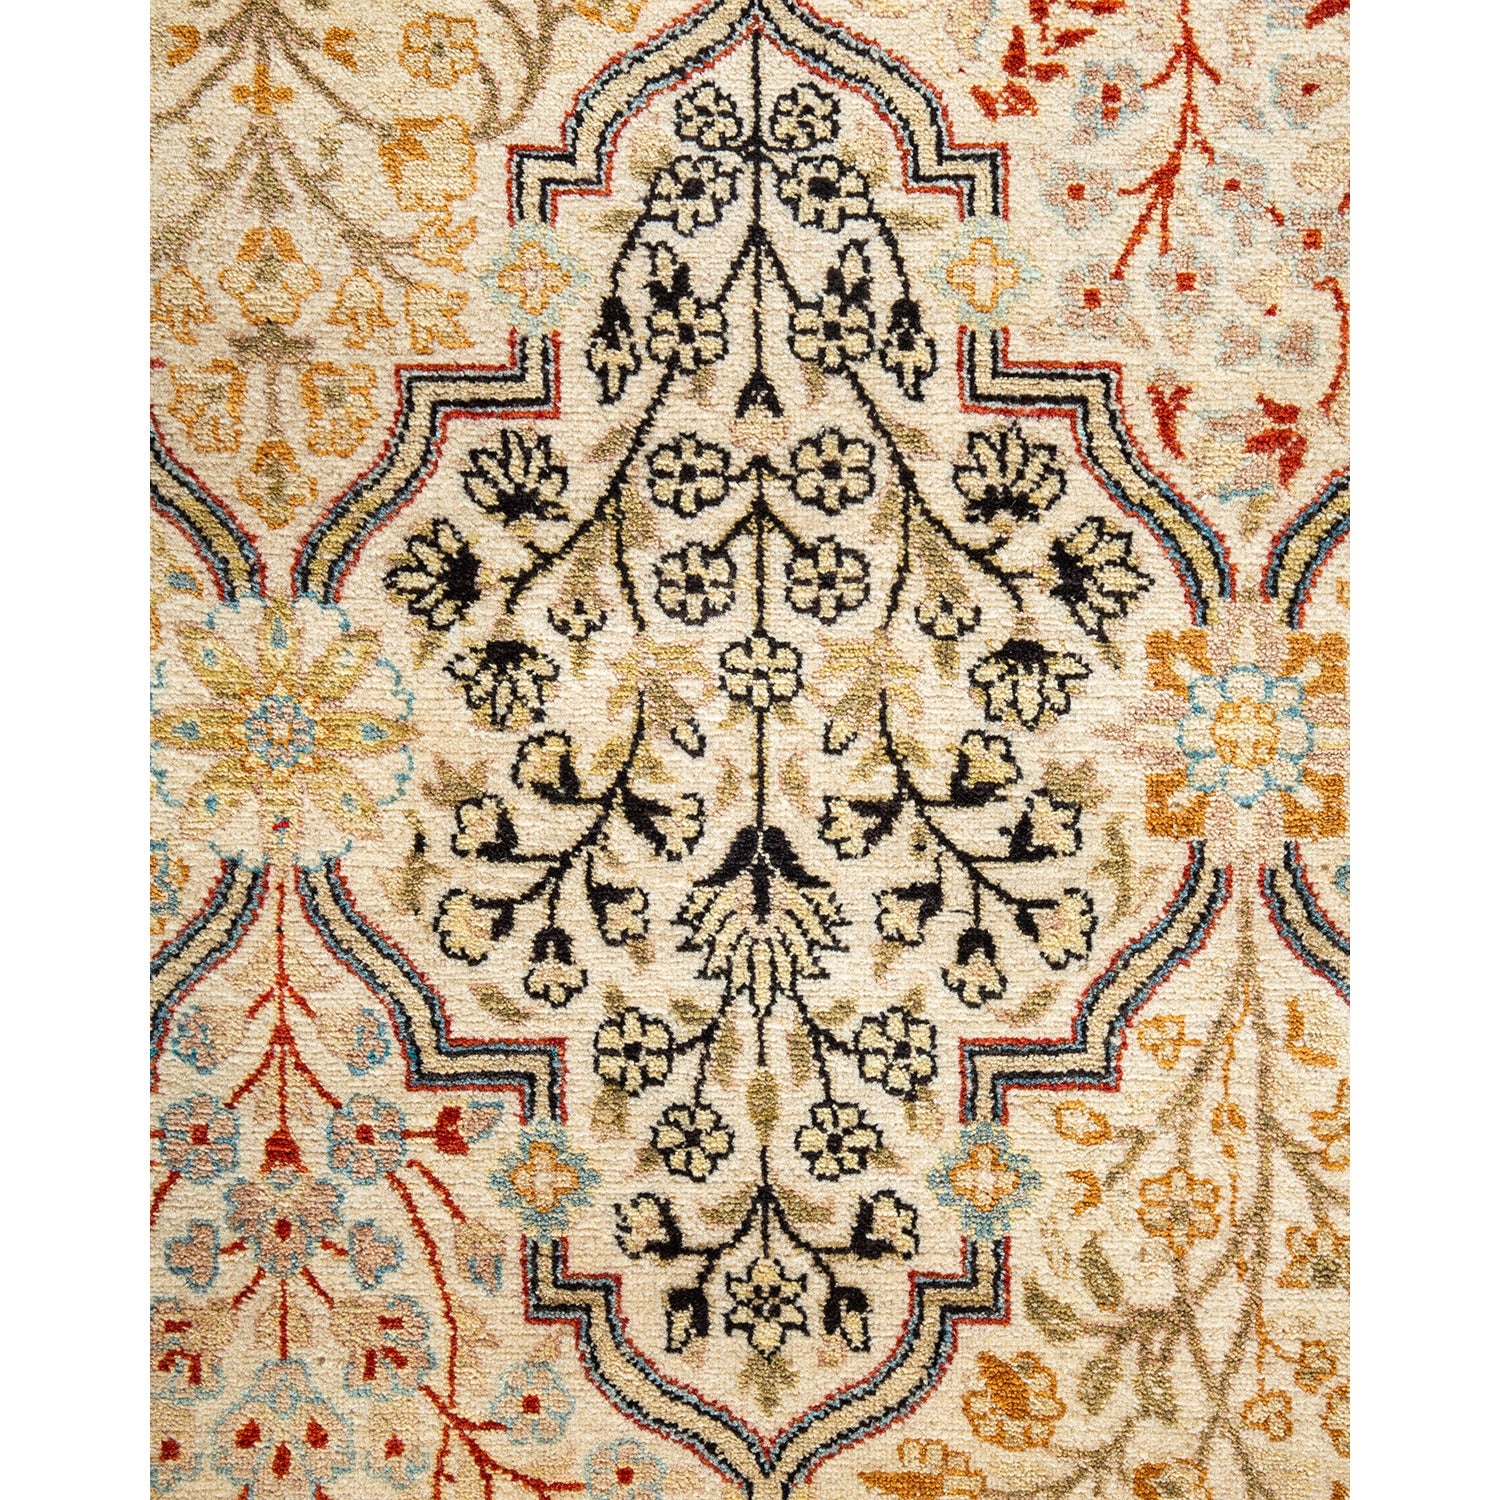 Intricately designed Persian rug with floral patterns in warm tones.